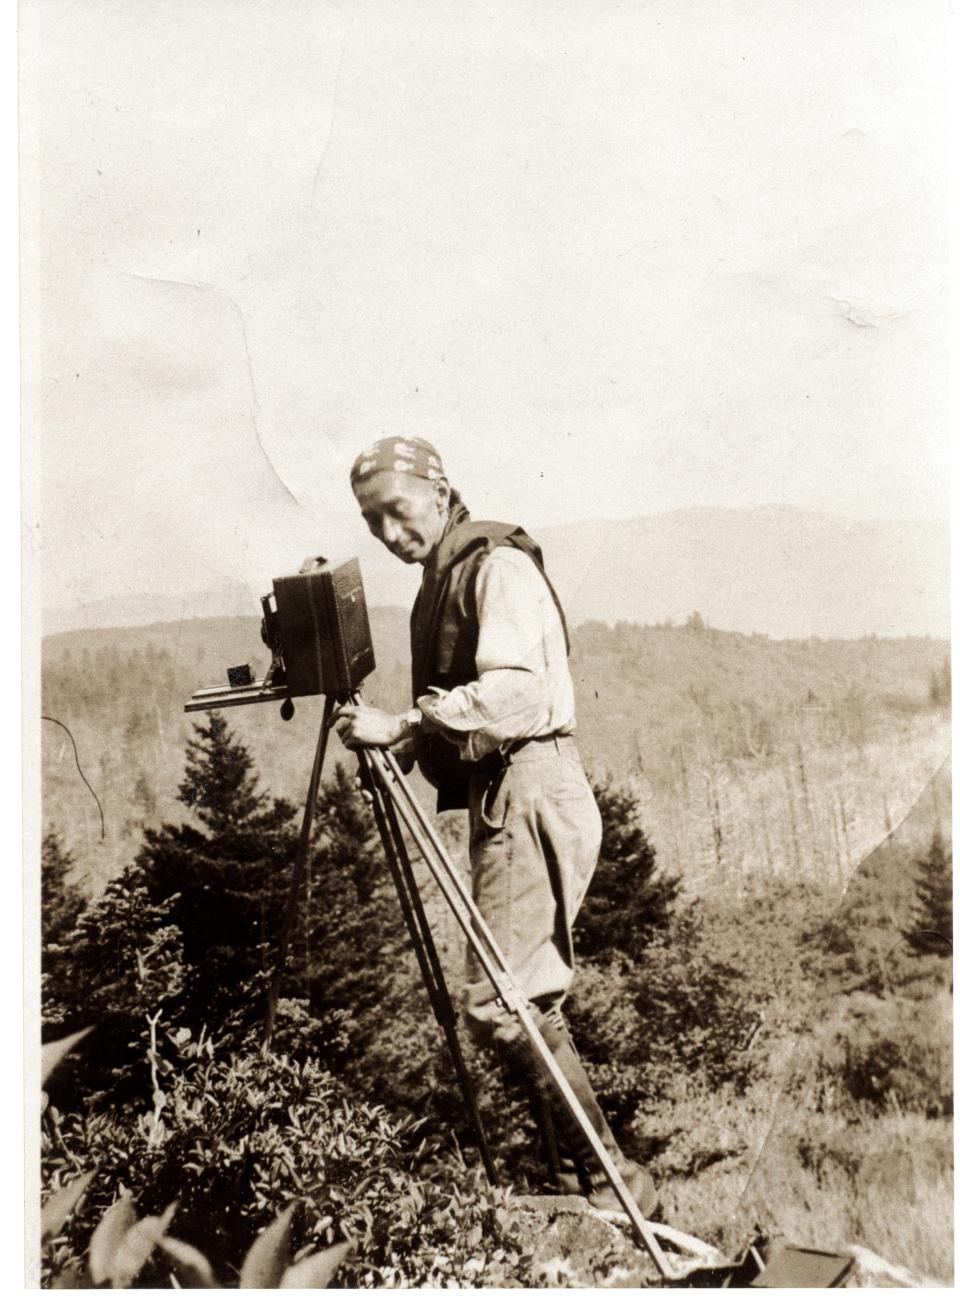 Dressed in his typical attire, George Masa sets up for a shot at Shining Rock in 1931.